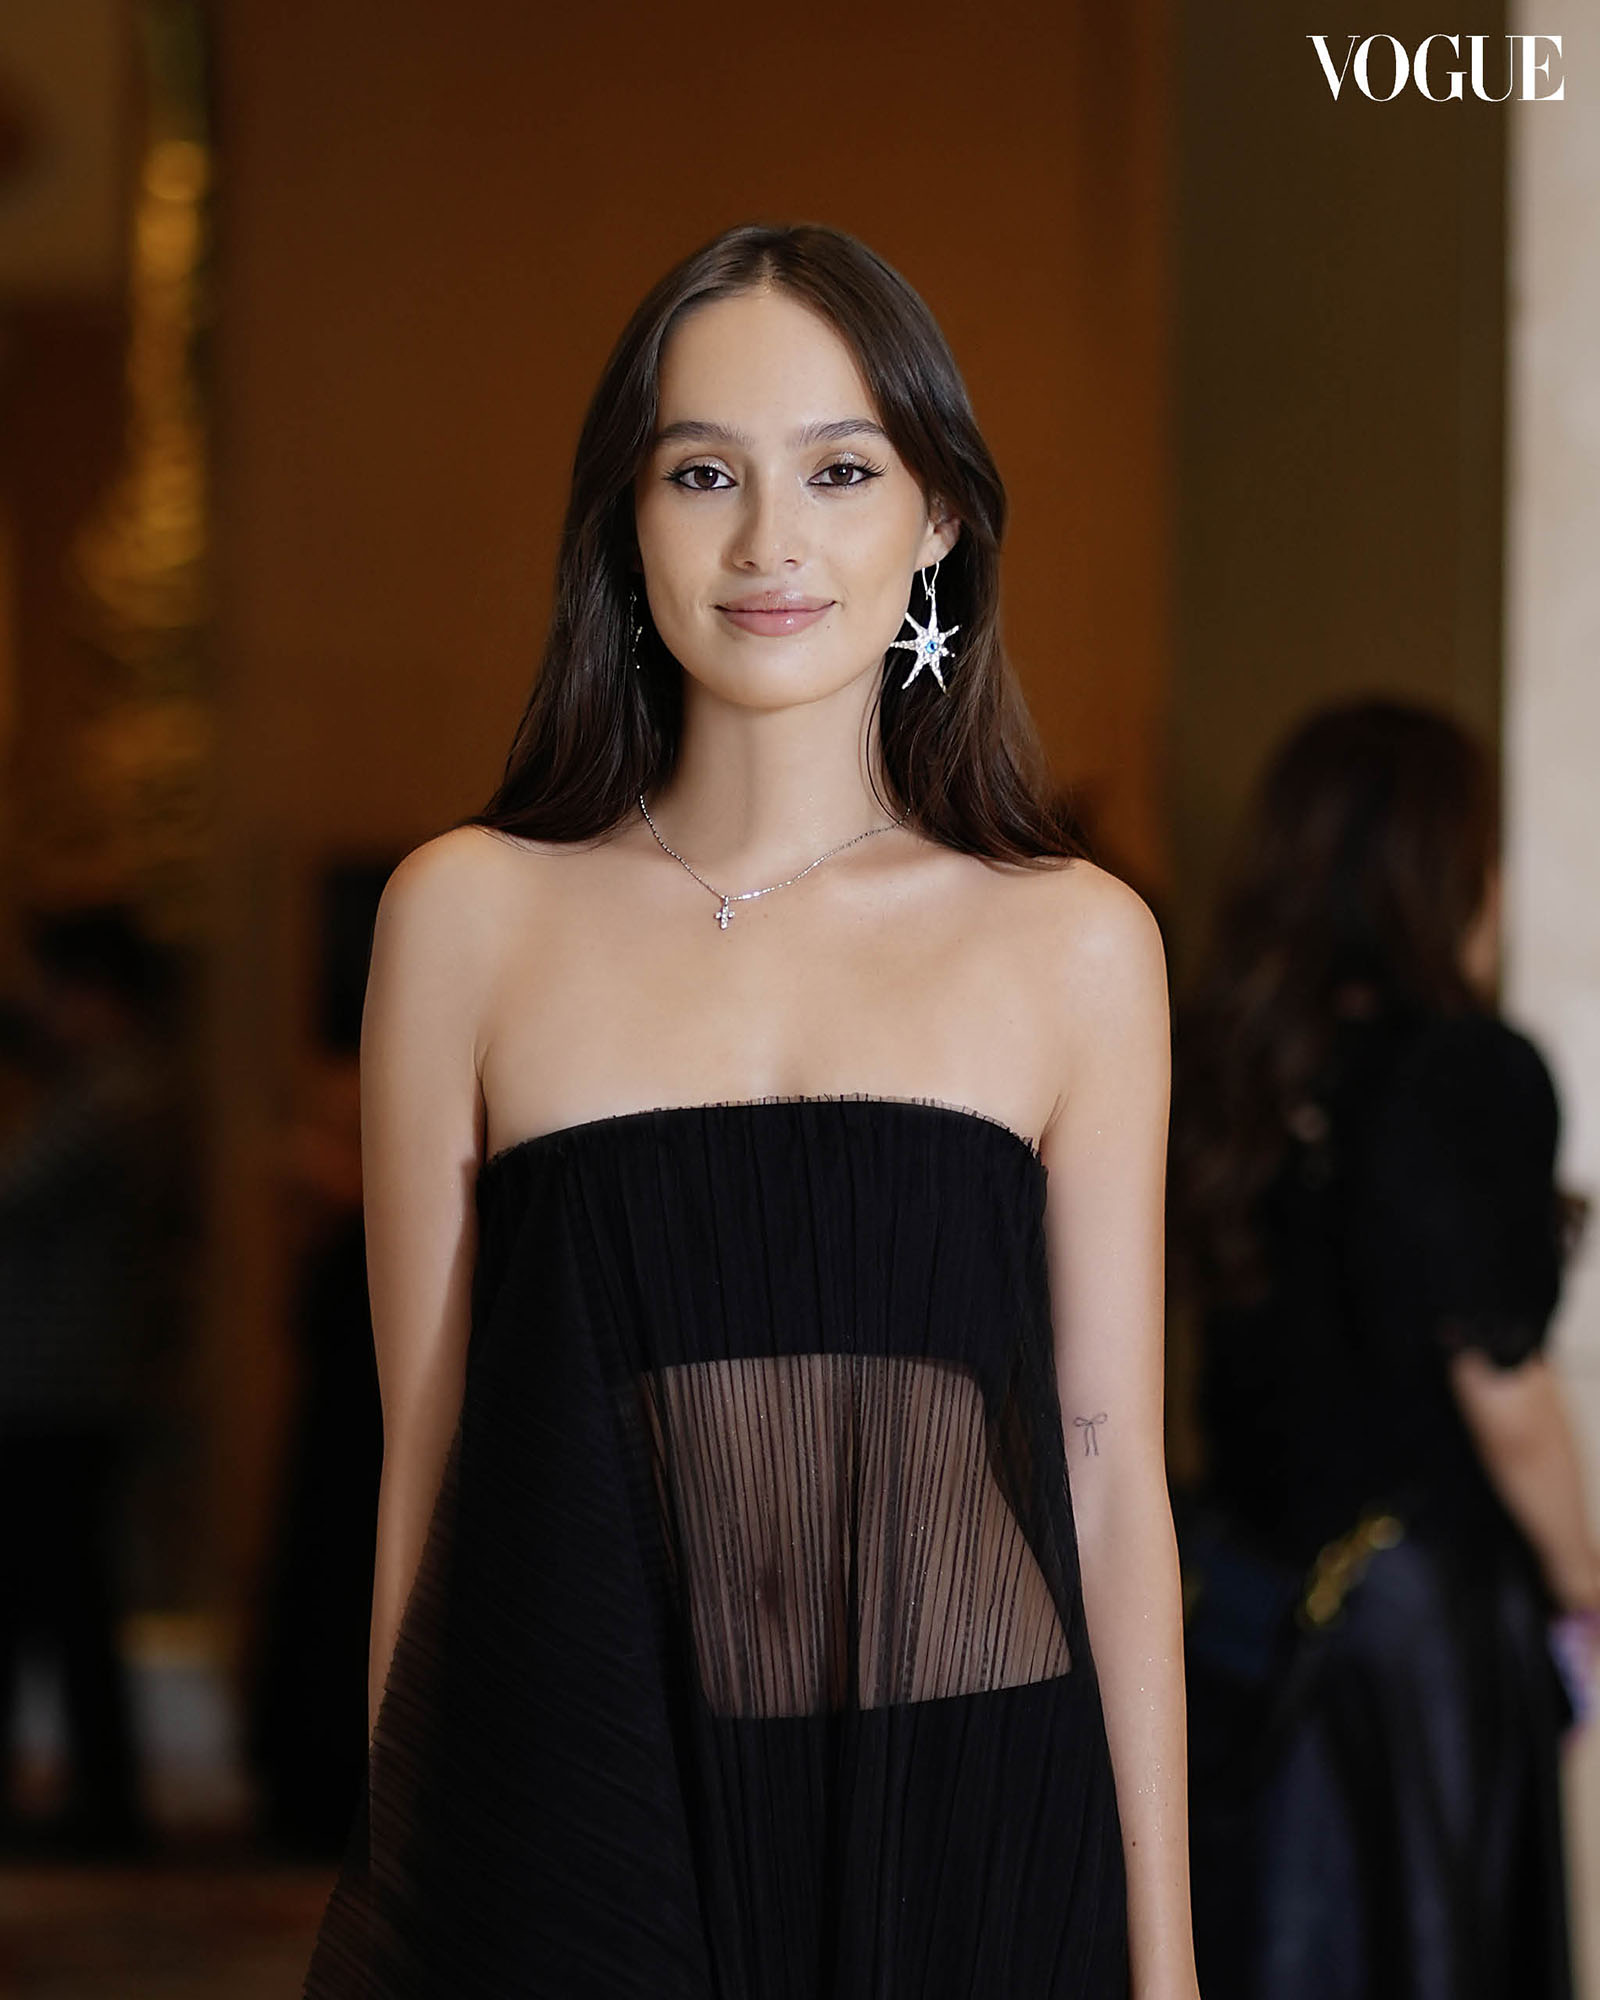 What Went Down At The Vogue Philippines Anniversary Gala